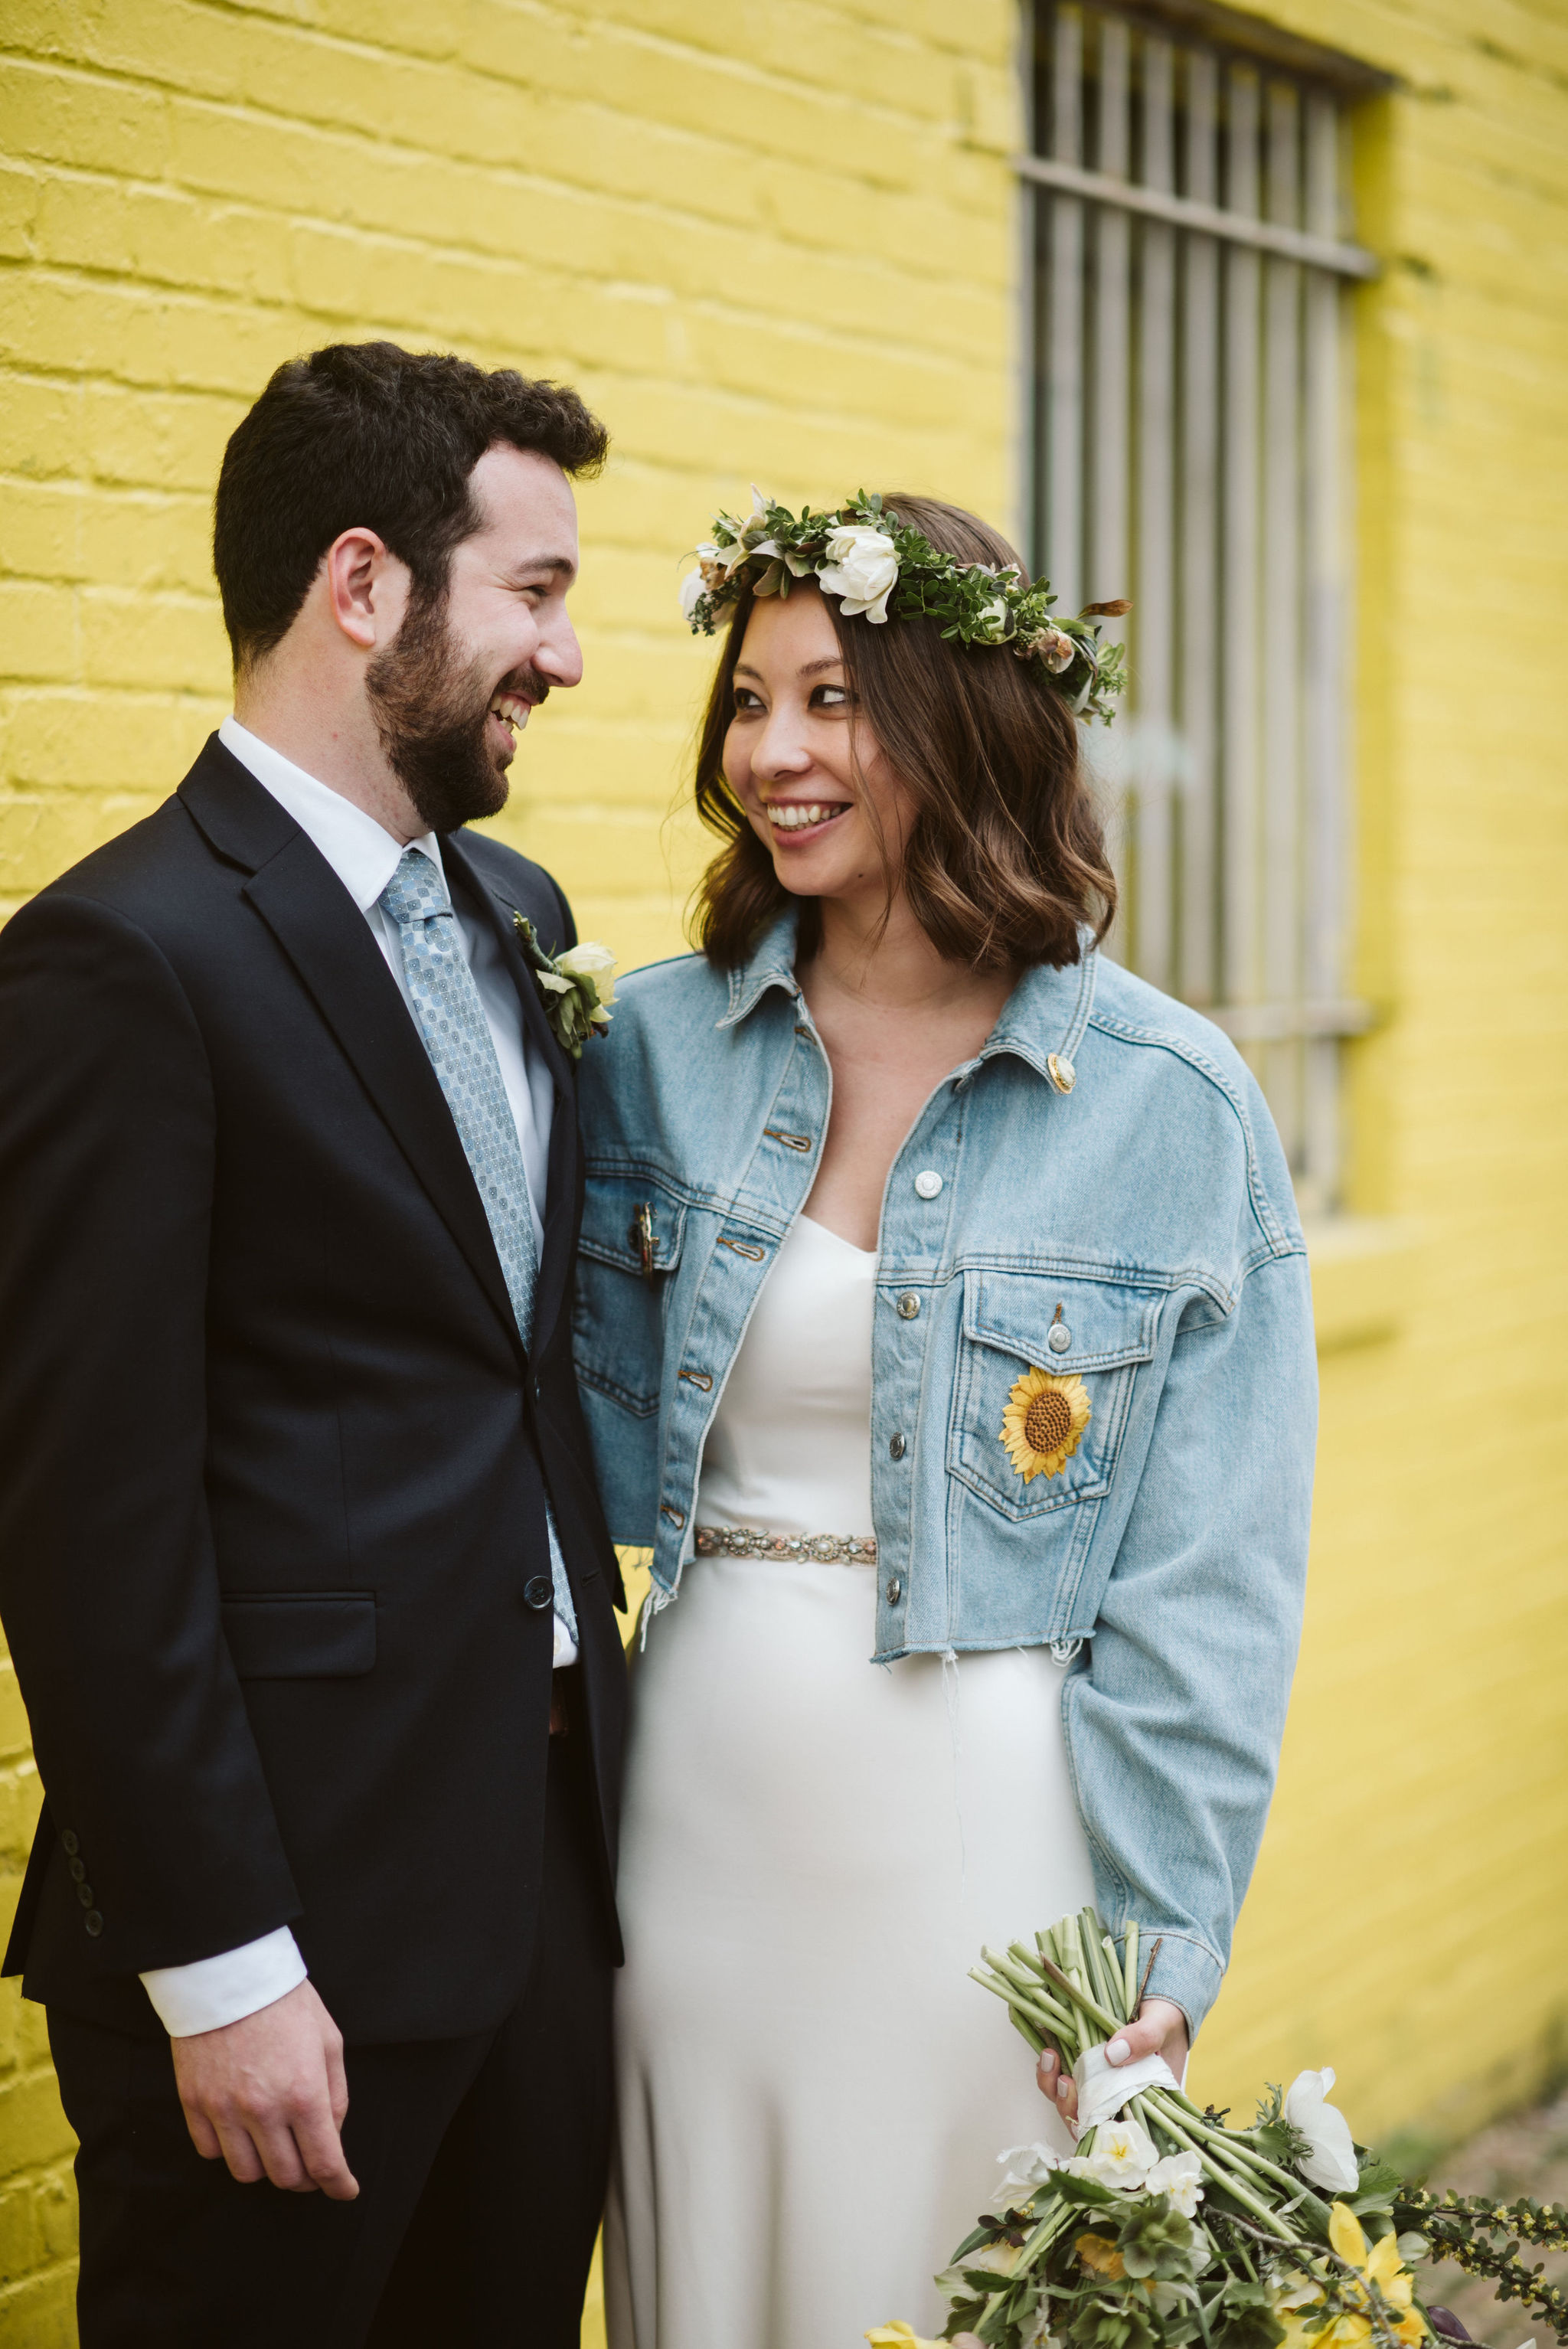  Washington DC, Baltimore Wedding Photographer, Alexandria, Old Town, Jewel Tone, Romantic, Modern, Sweet photo of bride and groom smiling together in front of yellow wall 